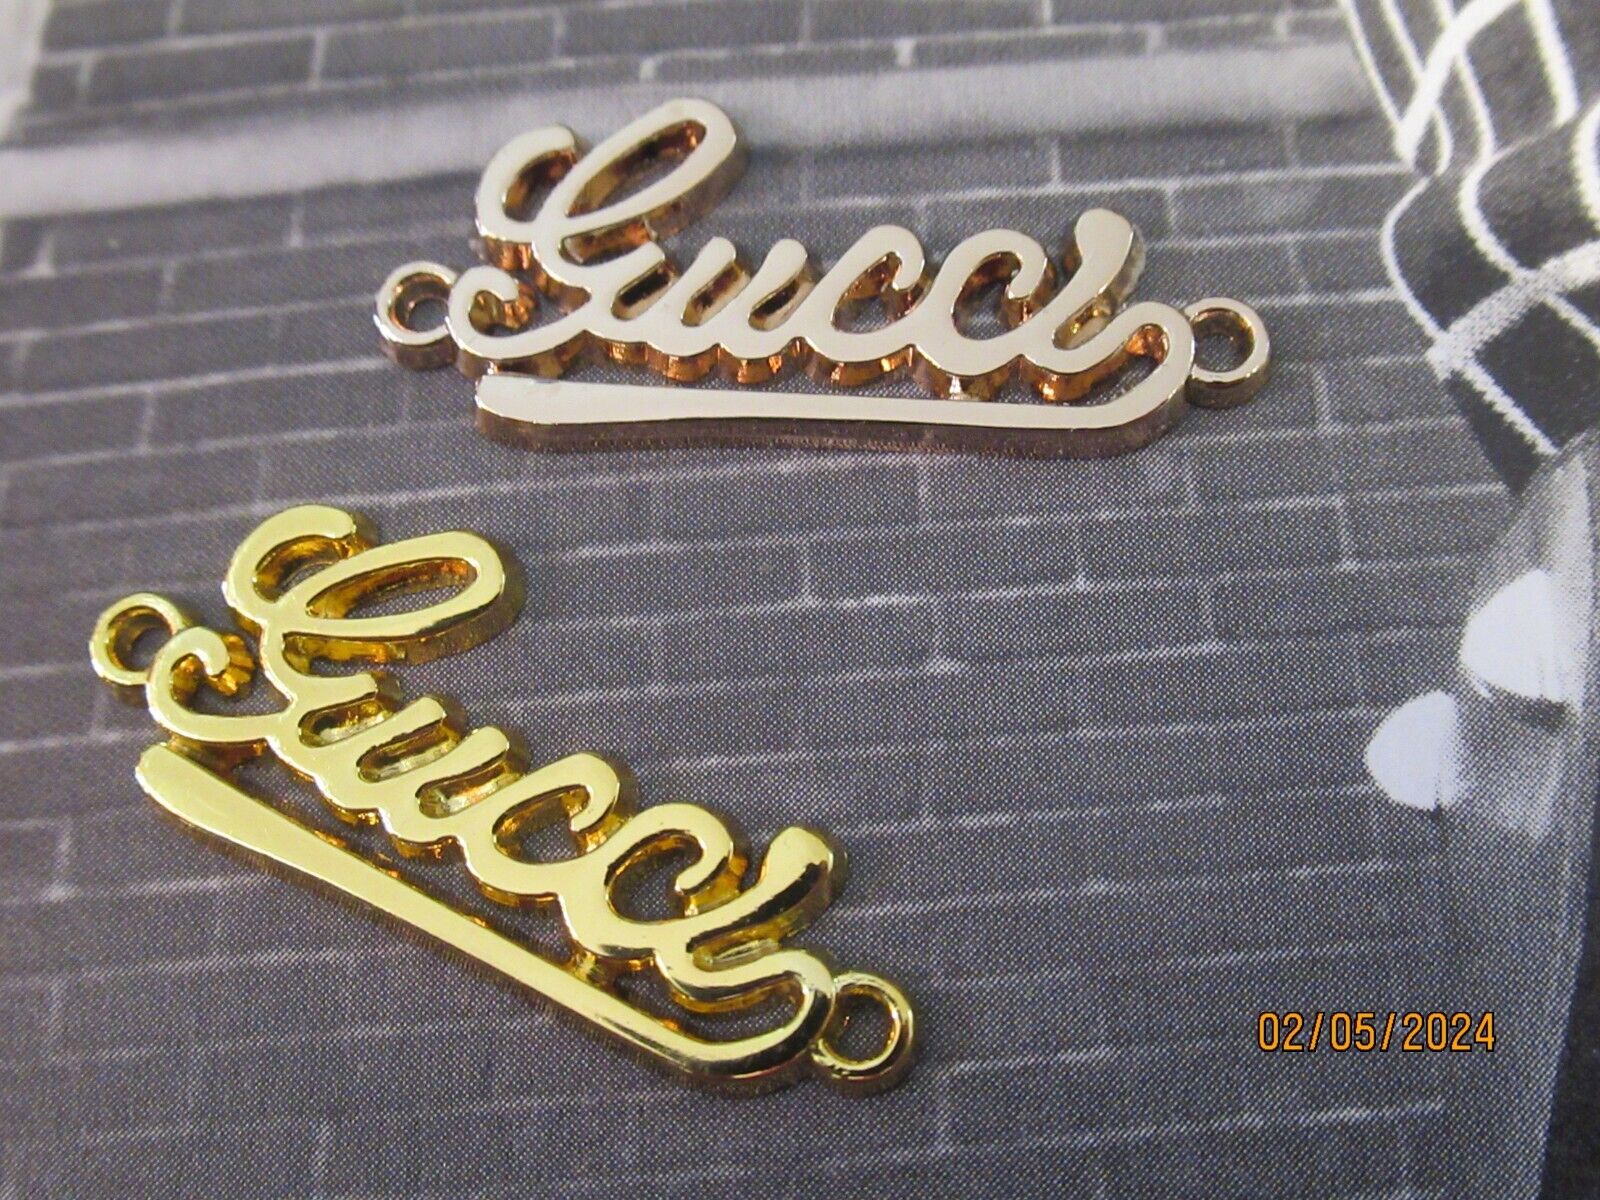 GUCCI 2 ZIP PULL  CHARM 32X14MM VIVID gold tone,  METAL  THIS IS FOR 2